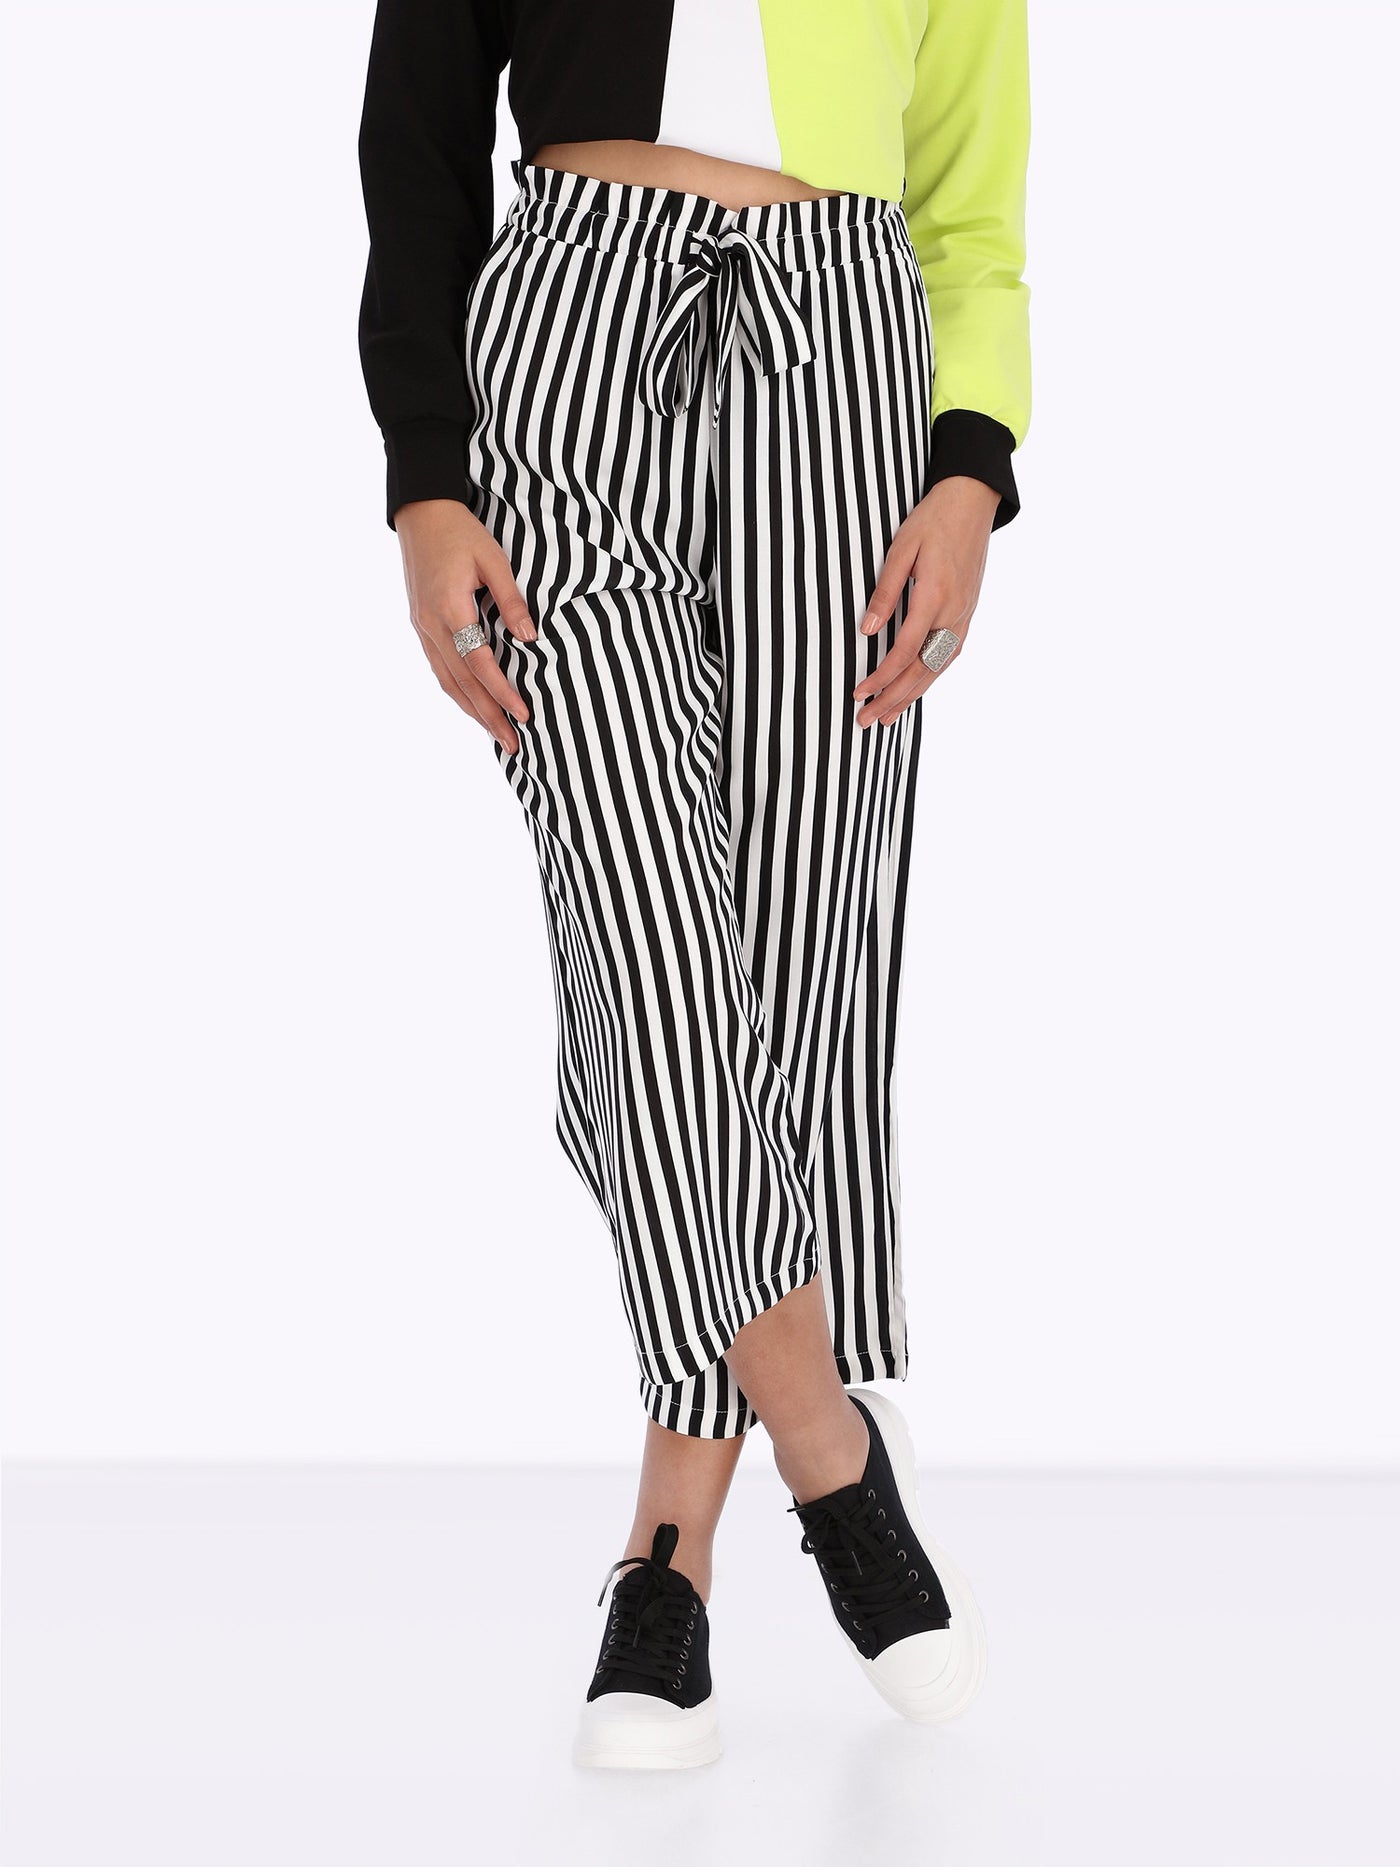  OR Women's Drawstring Striped Culottes